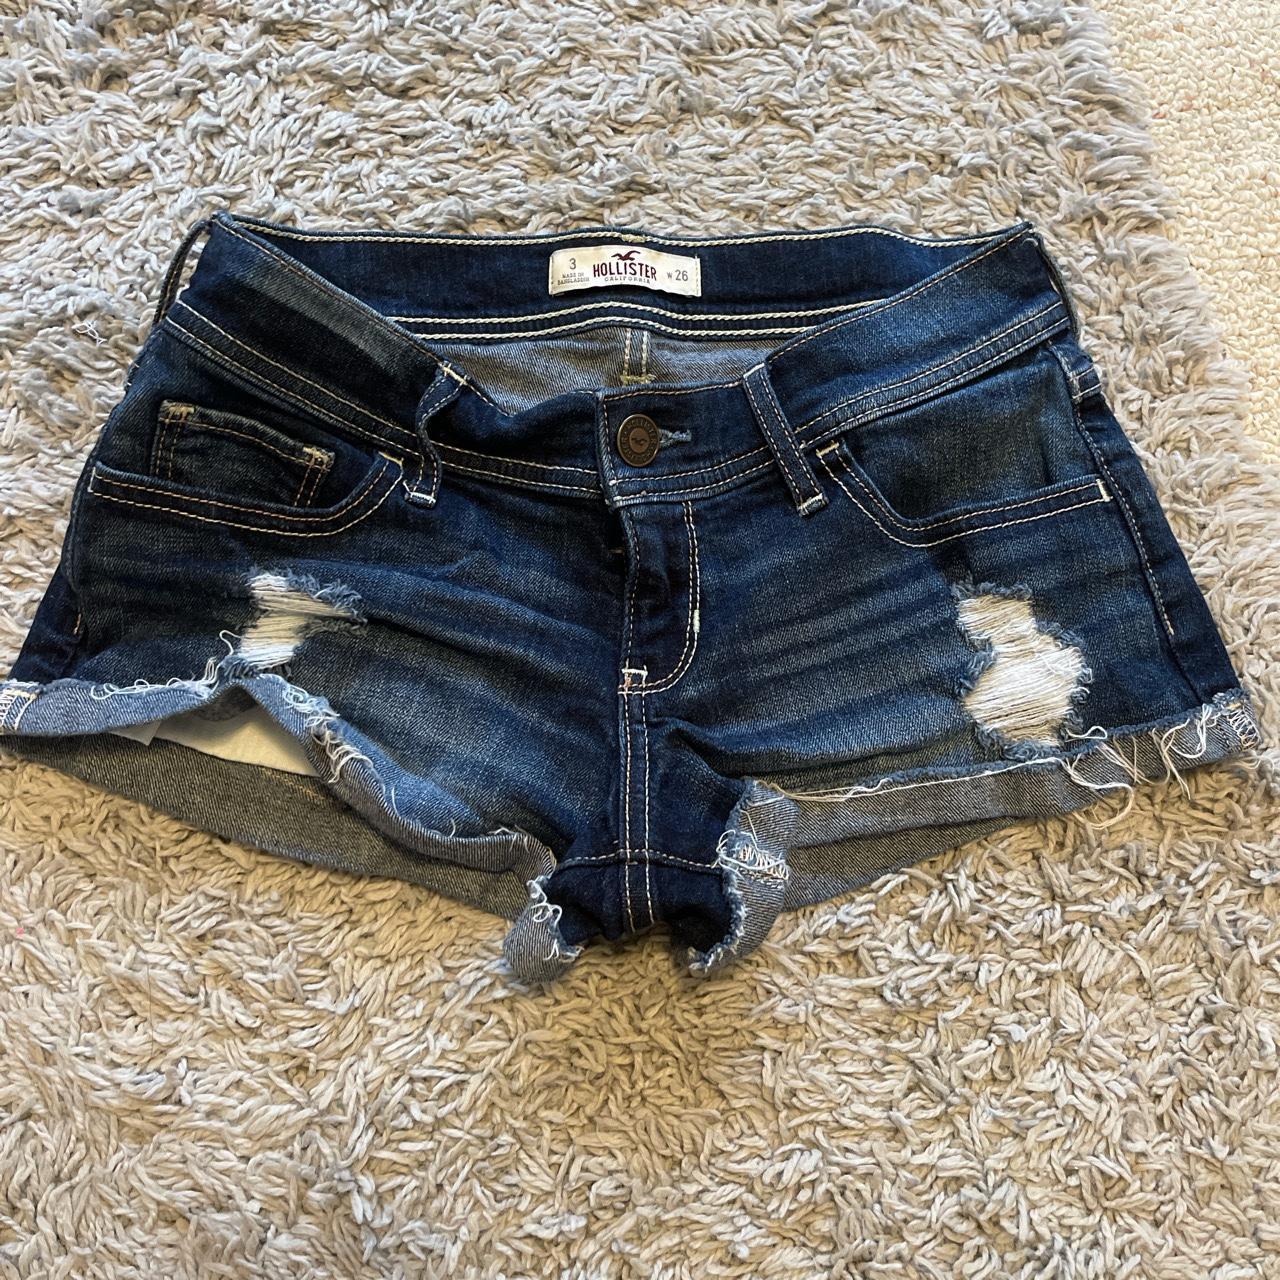 Hollister jean shorts. Size 3 w 26. Very short and - Depop